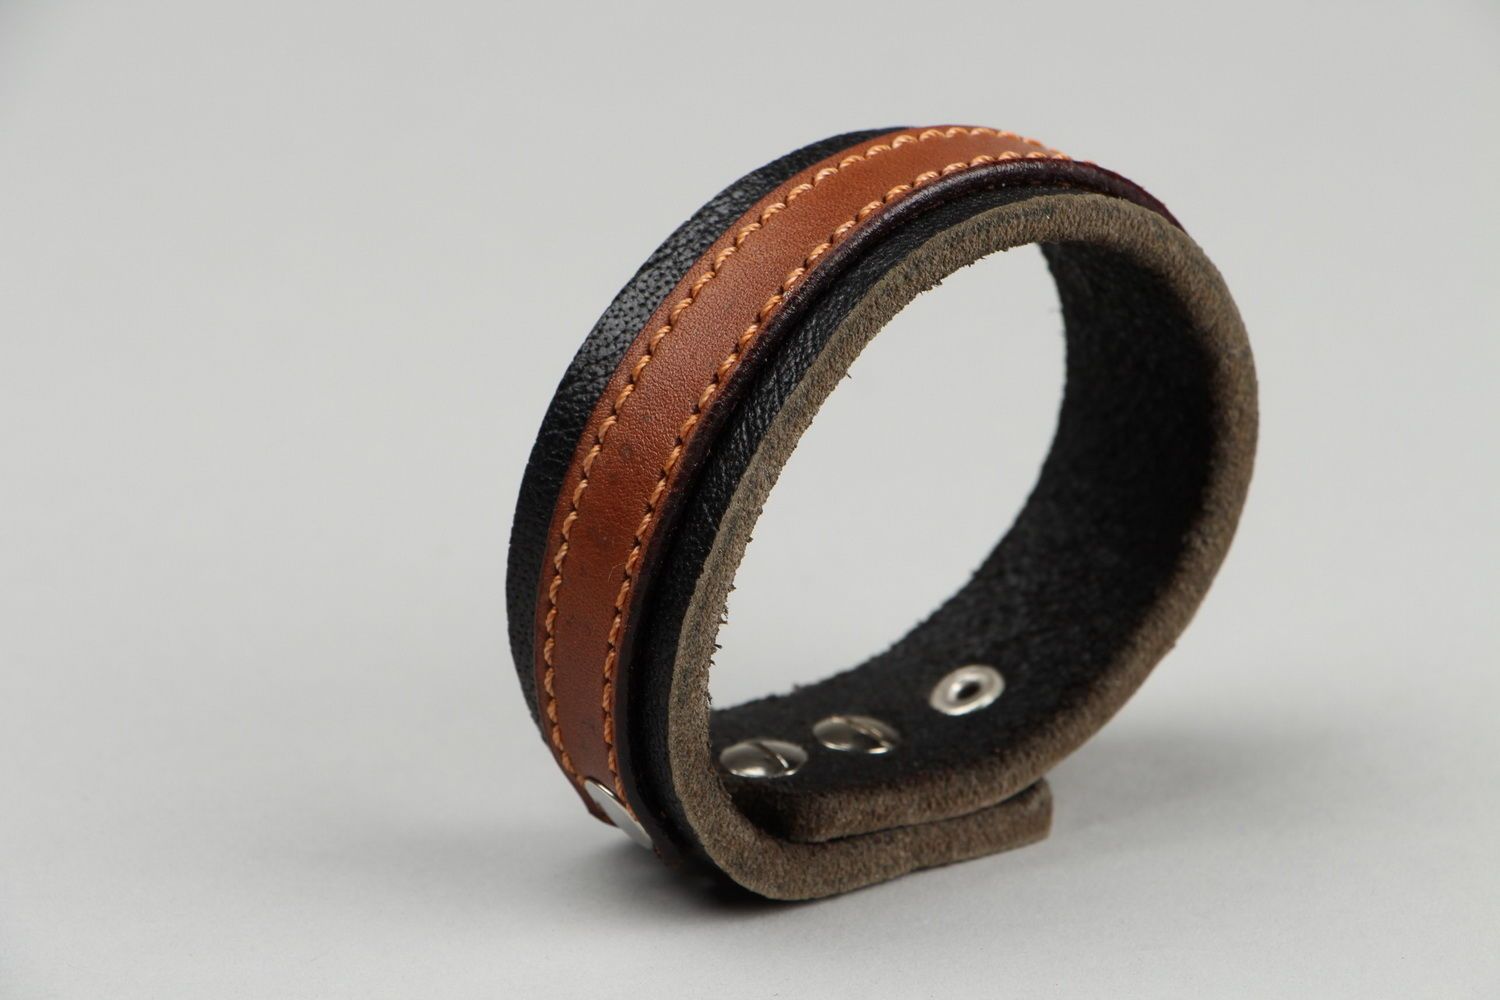 Bracelet of the two types of leather photo 2